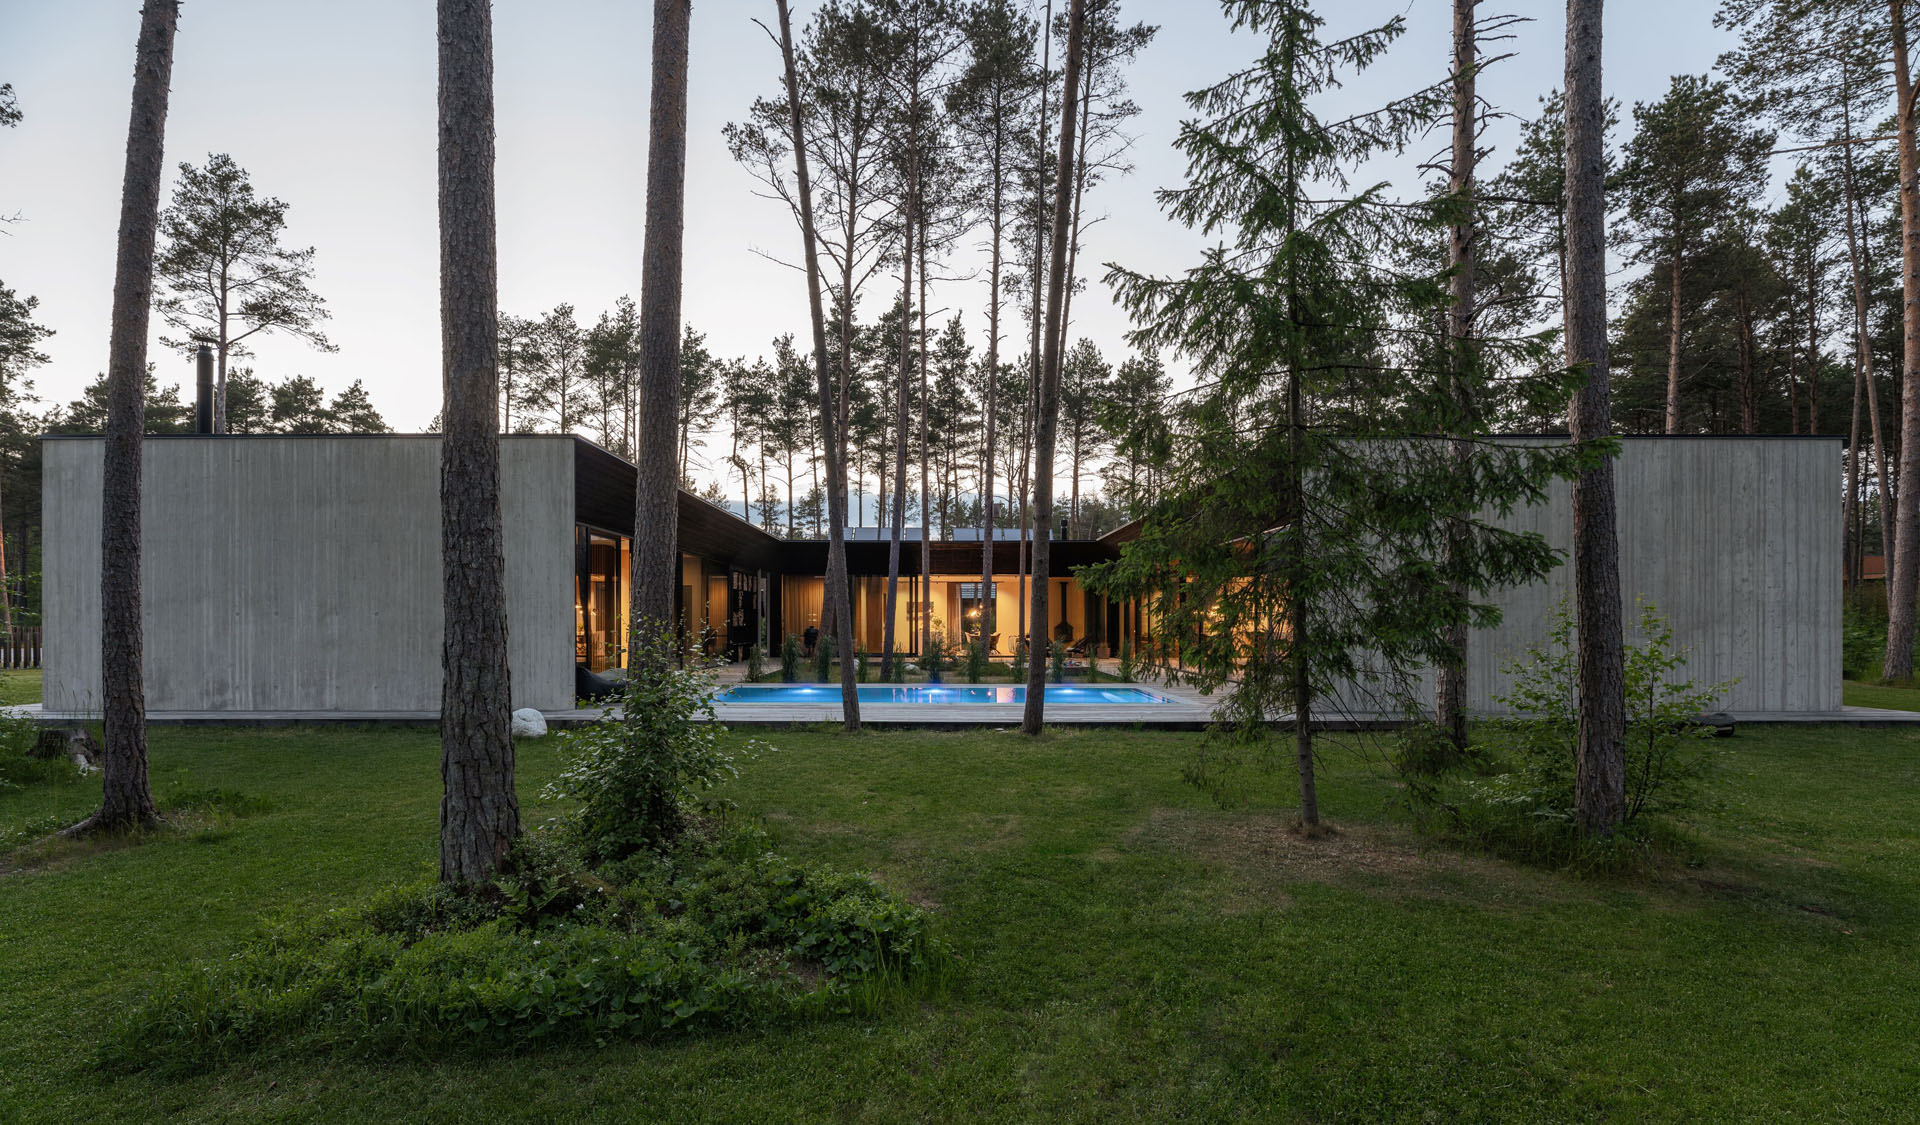 Bungalow made of exposed concrete, surrounded by individual trees, with an illuminated pool in the inner courtyard